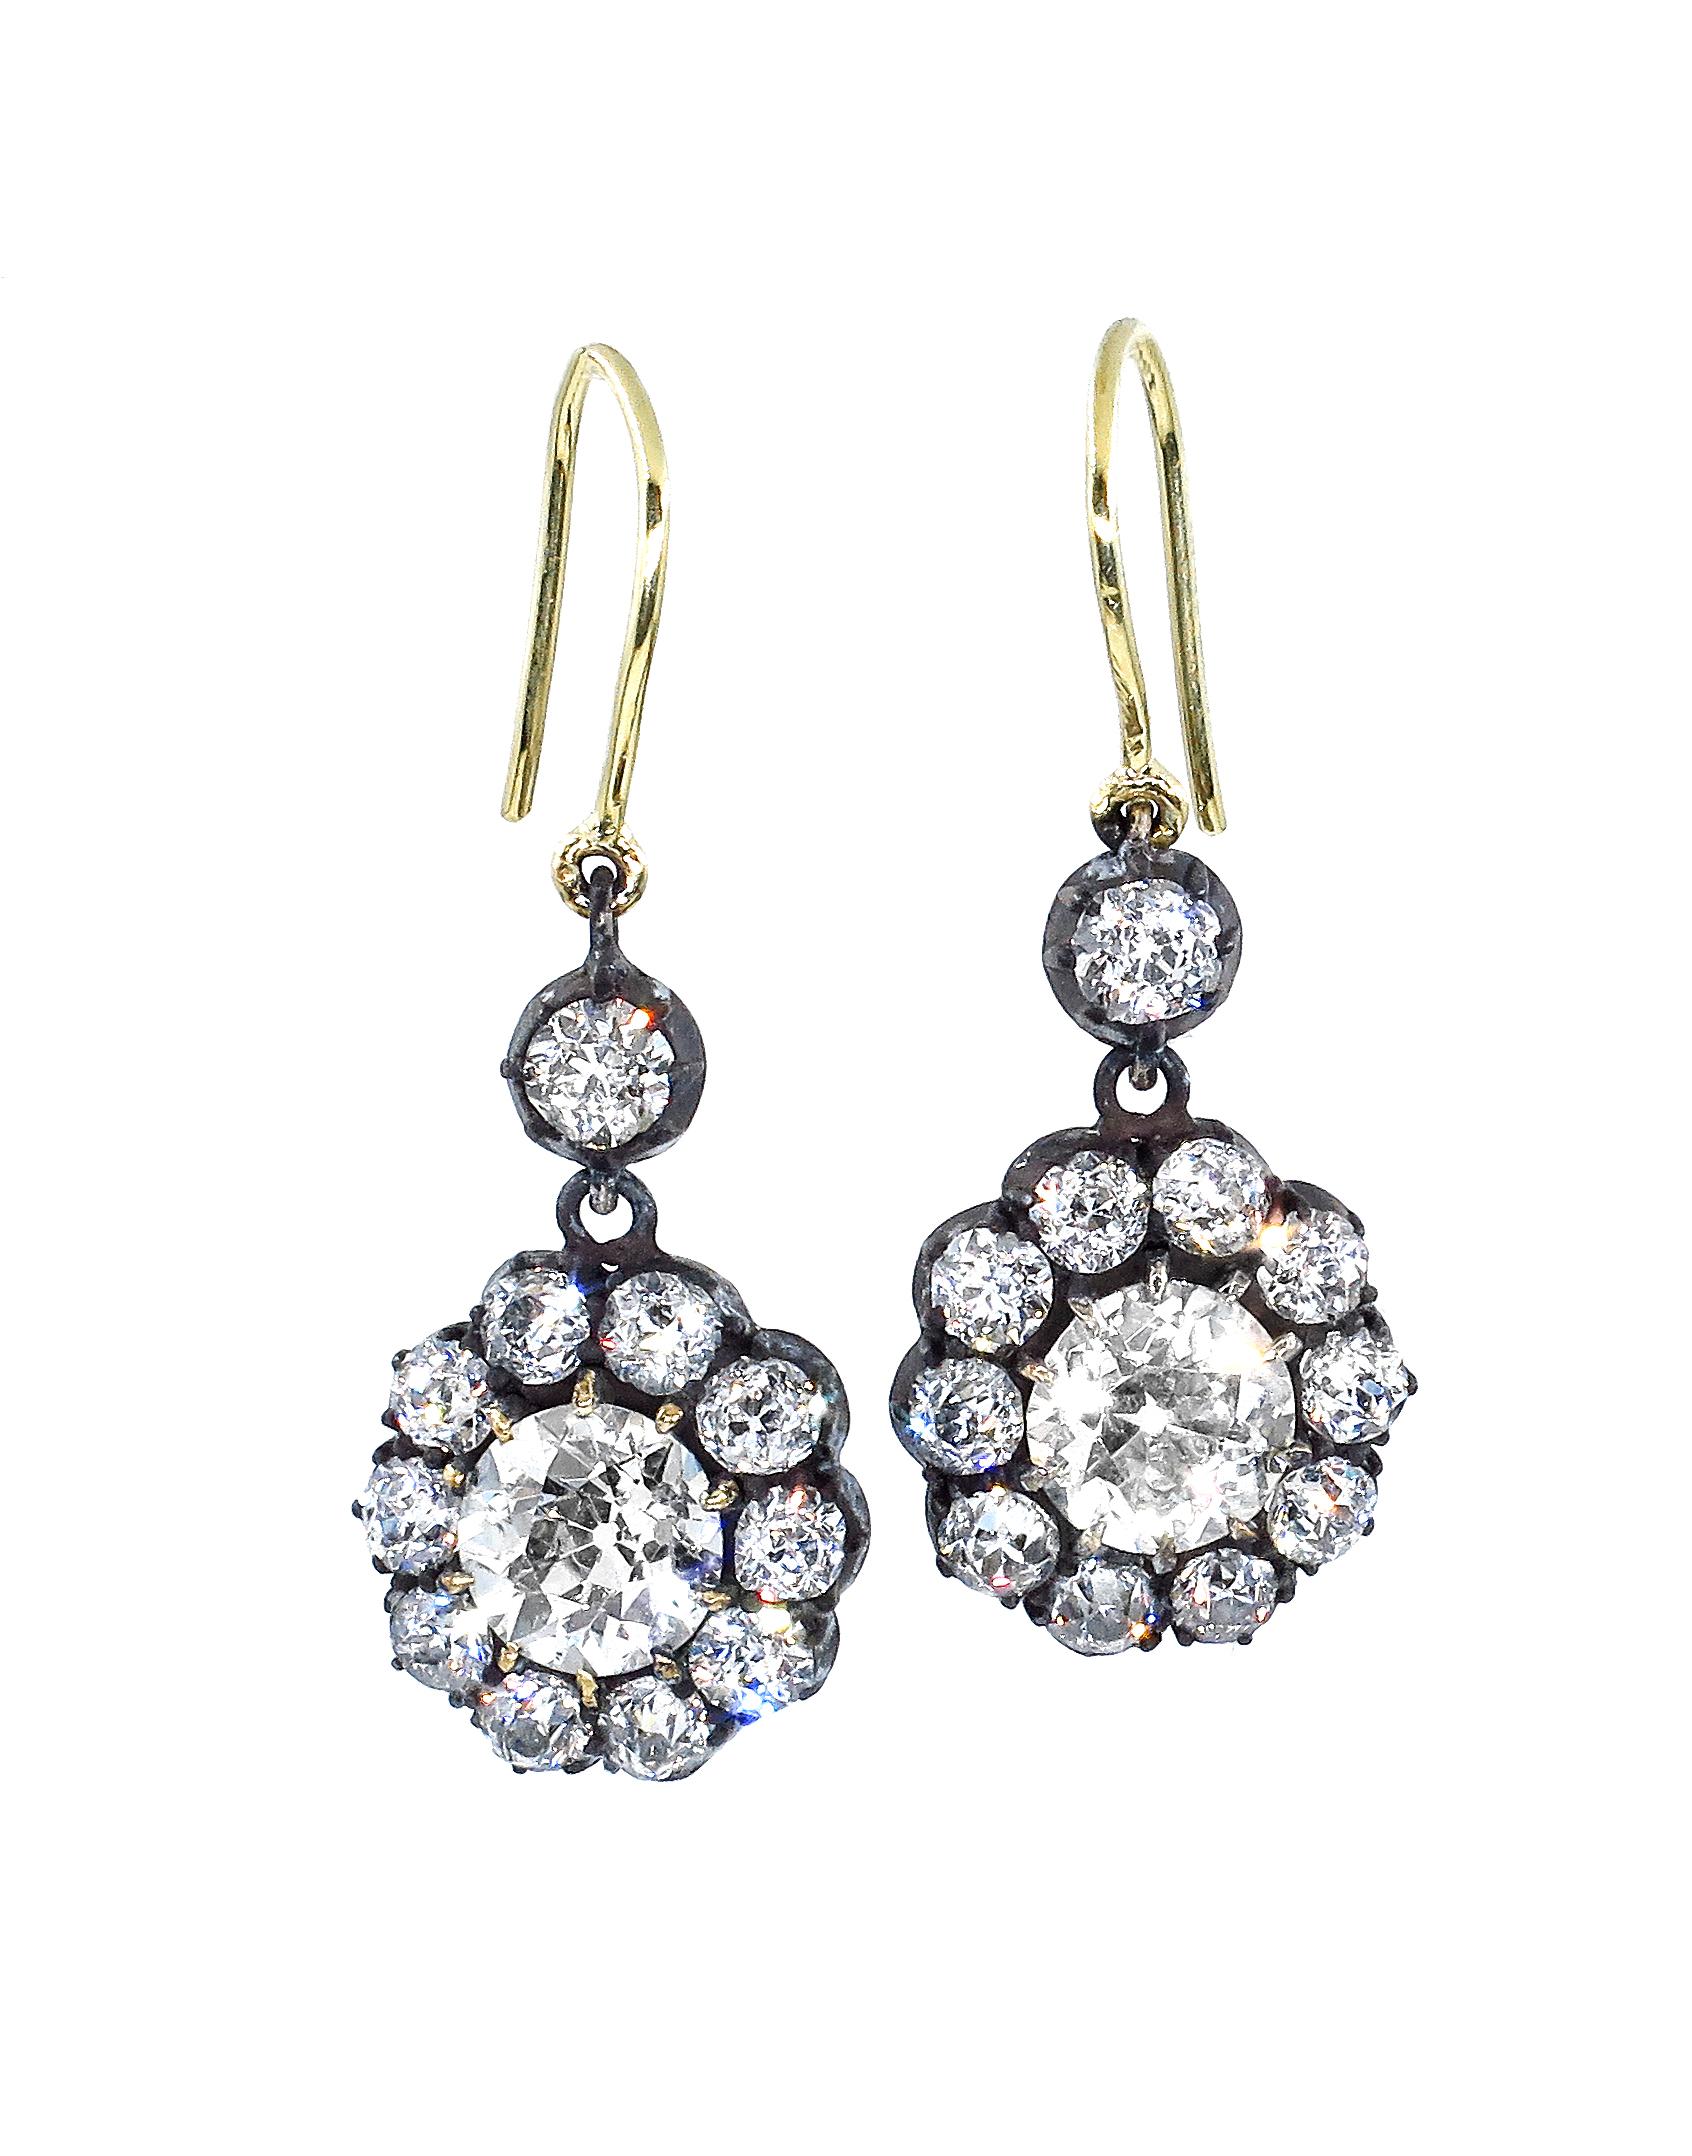 Unique and Exquisite pair of Original Early Victorian Era 18k Gold ( tested ), and oxidize blackened silver top (as all the diamonds were set back in the day to bring out the brilliance) Earrings with shimmering Old Mine cut Diamonds.
Circa 1840s,